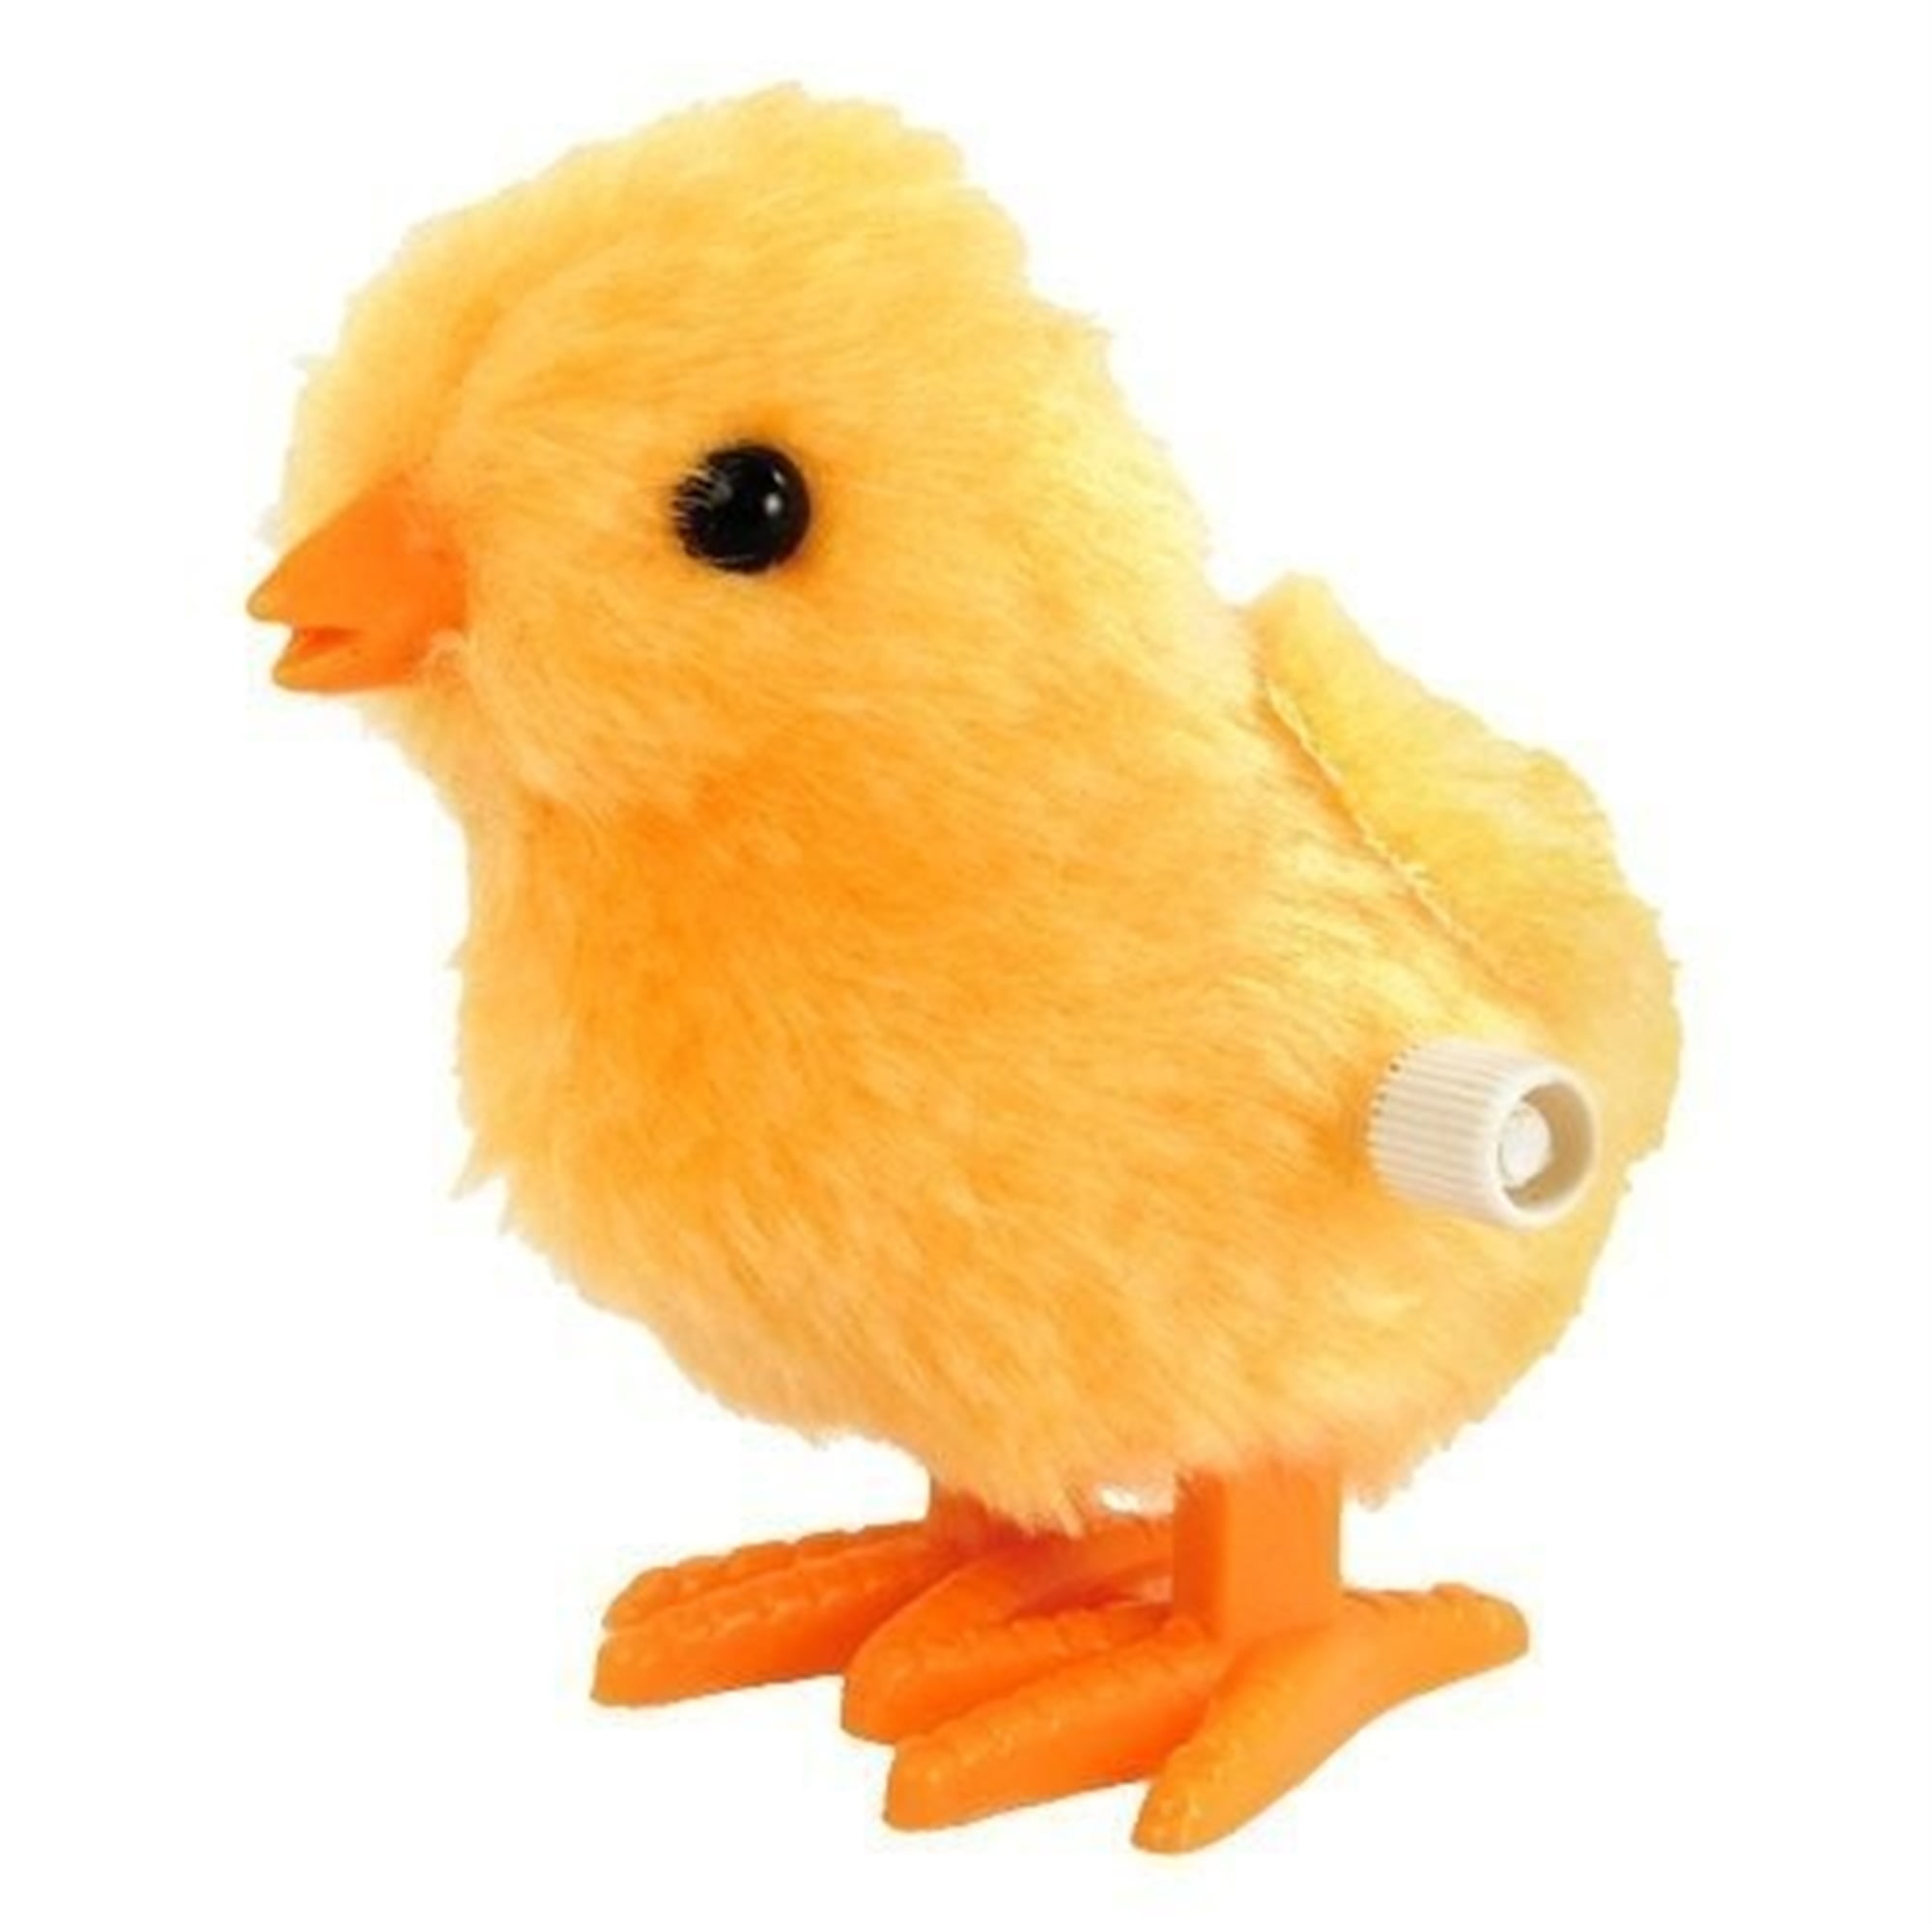 Toysmith 9068477 Plastic Fuzzy Chick Wind Up Toy, Yellow - Pack of 24